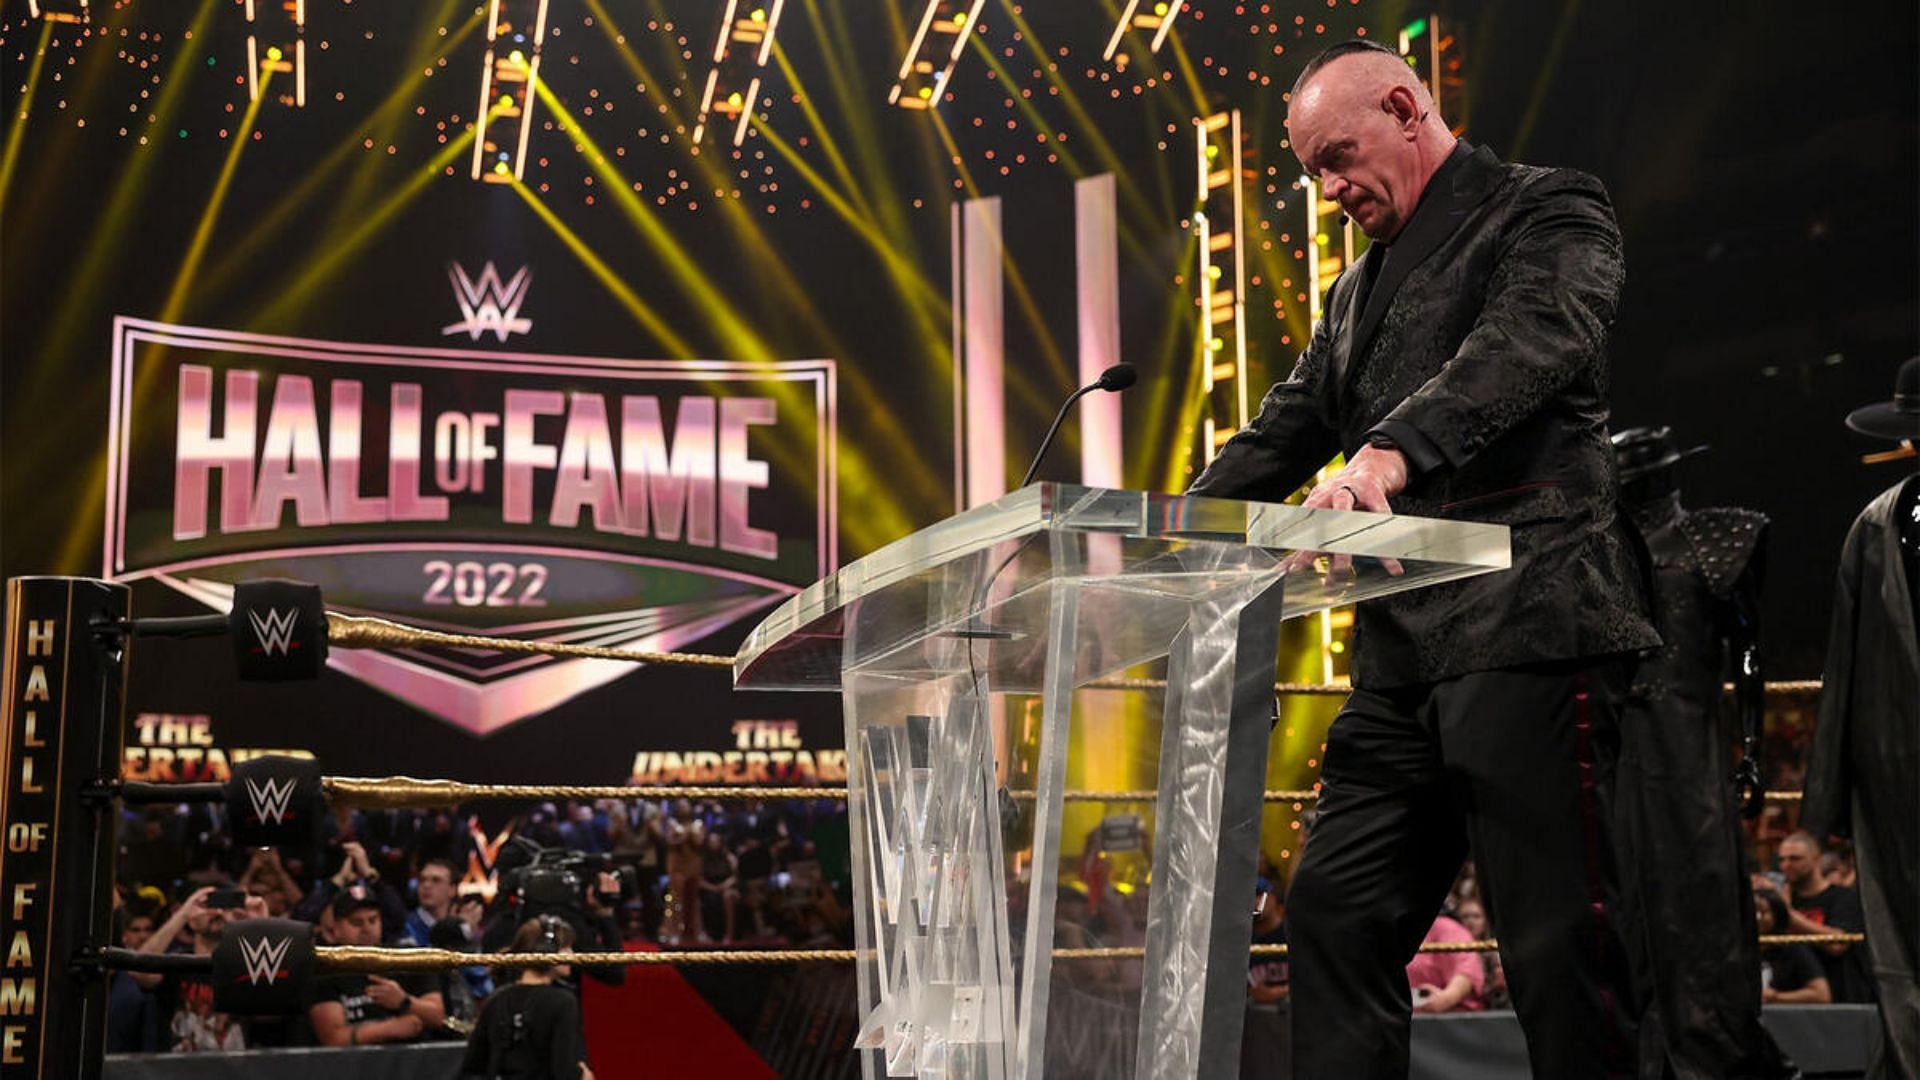 The Deadman was inducted into the WWE Hall of Fame Class of 2022.